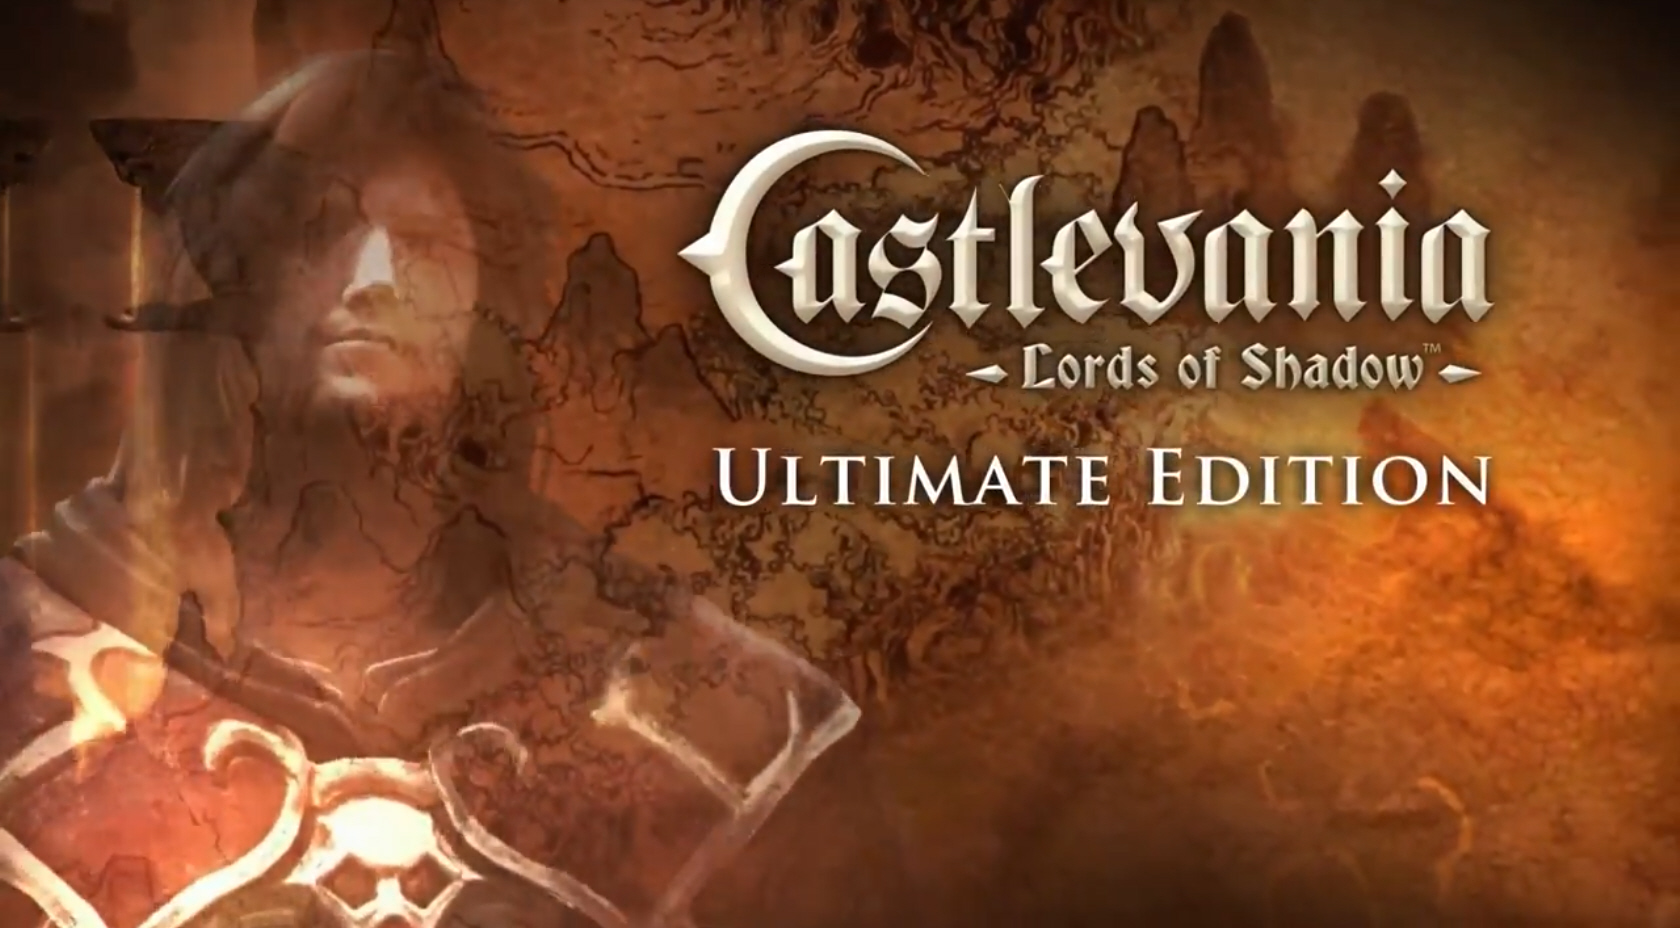 Castlevania Lords of Shadow Ultimate Edition Announced For PC. Includes New  Storyline With Classic Characters, Better Graphics, New Weapons, Skills,  Titan Bosses, New Routes And Locations, 60fps, Steam Achievements